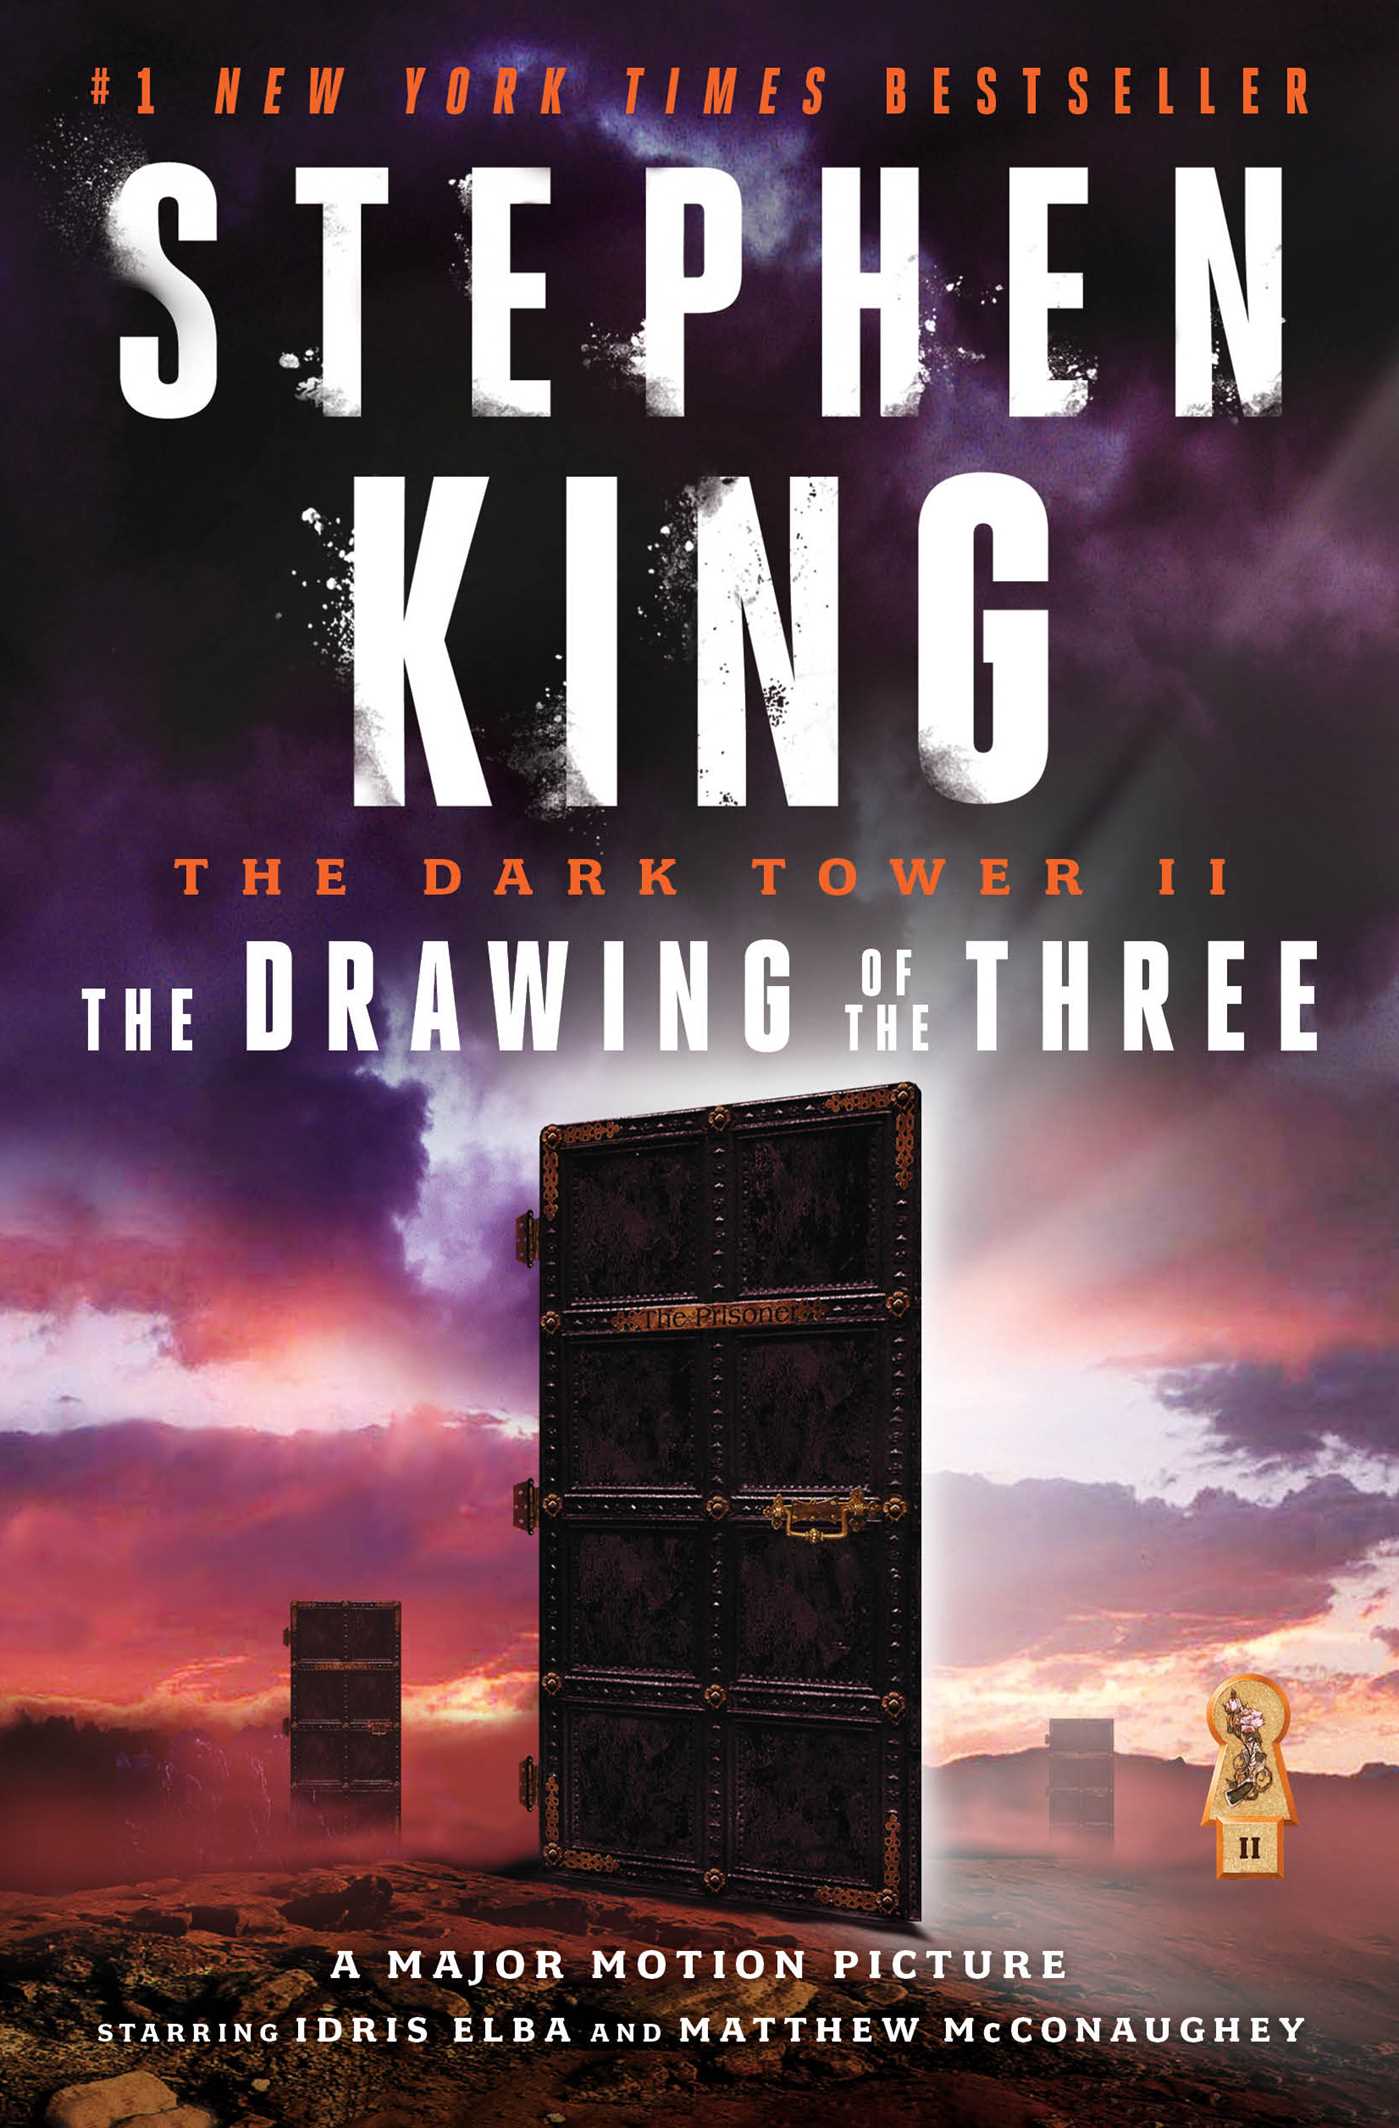 The Dark Tower II The Drawing of the Three The Dark Tower Wiki